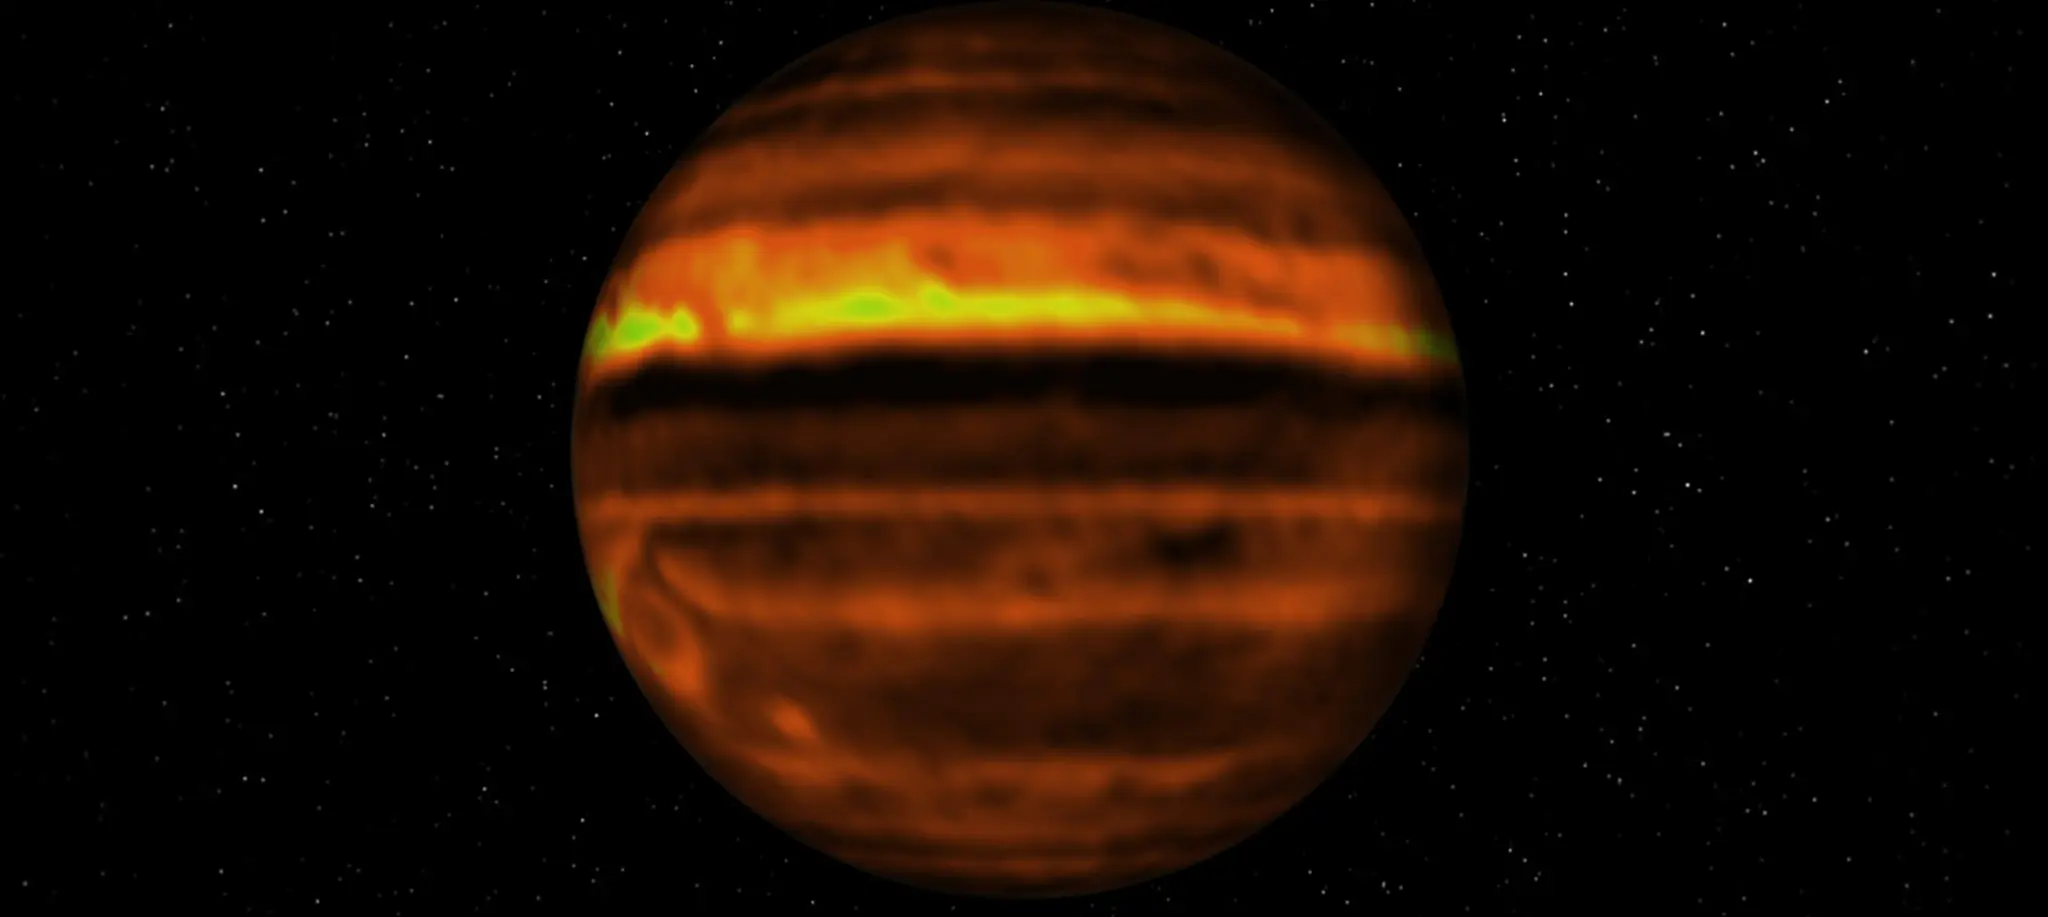 What goes on beneath Jupiter’s clouds?